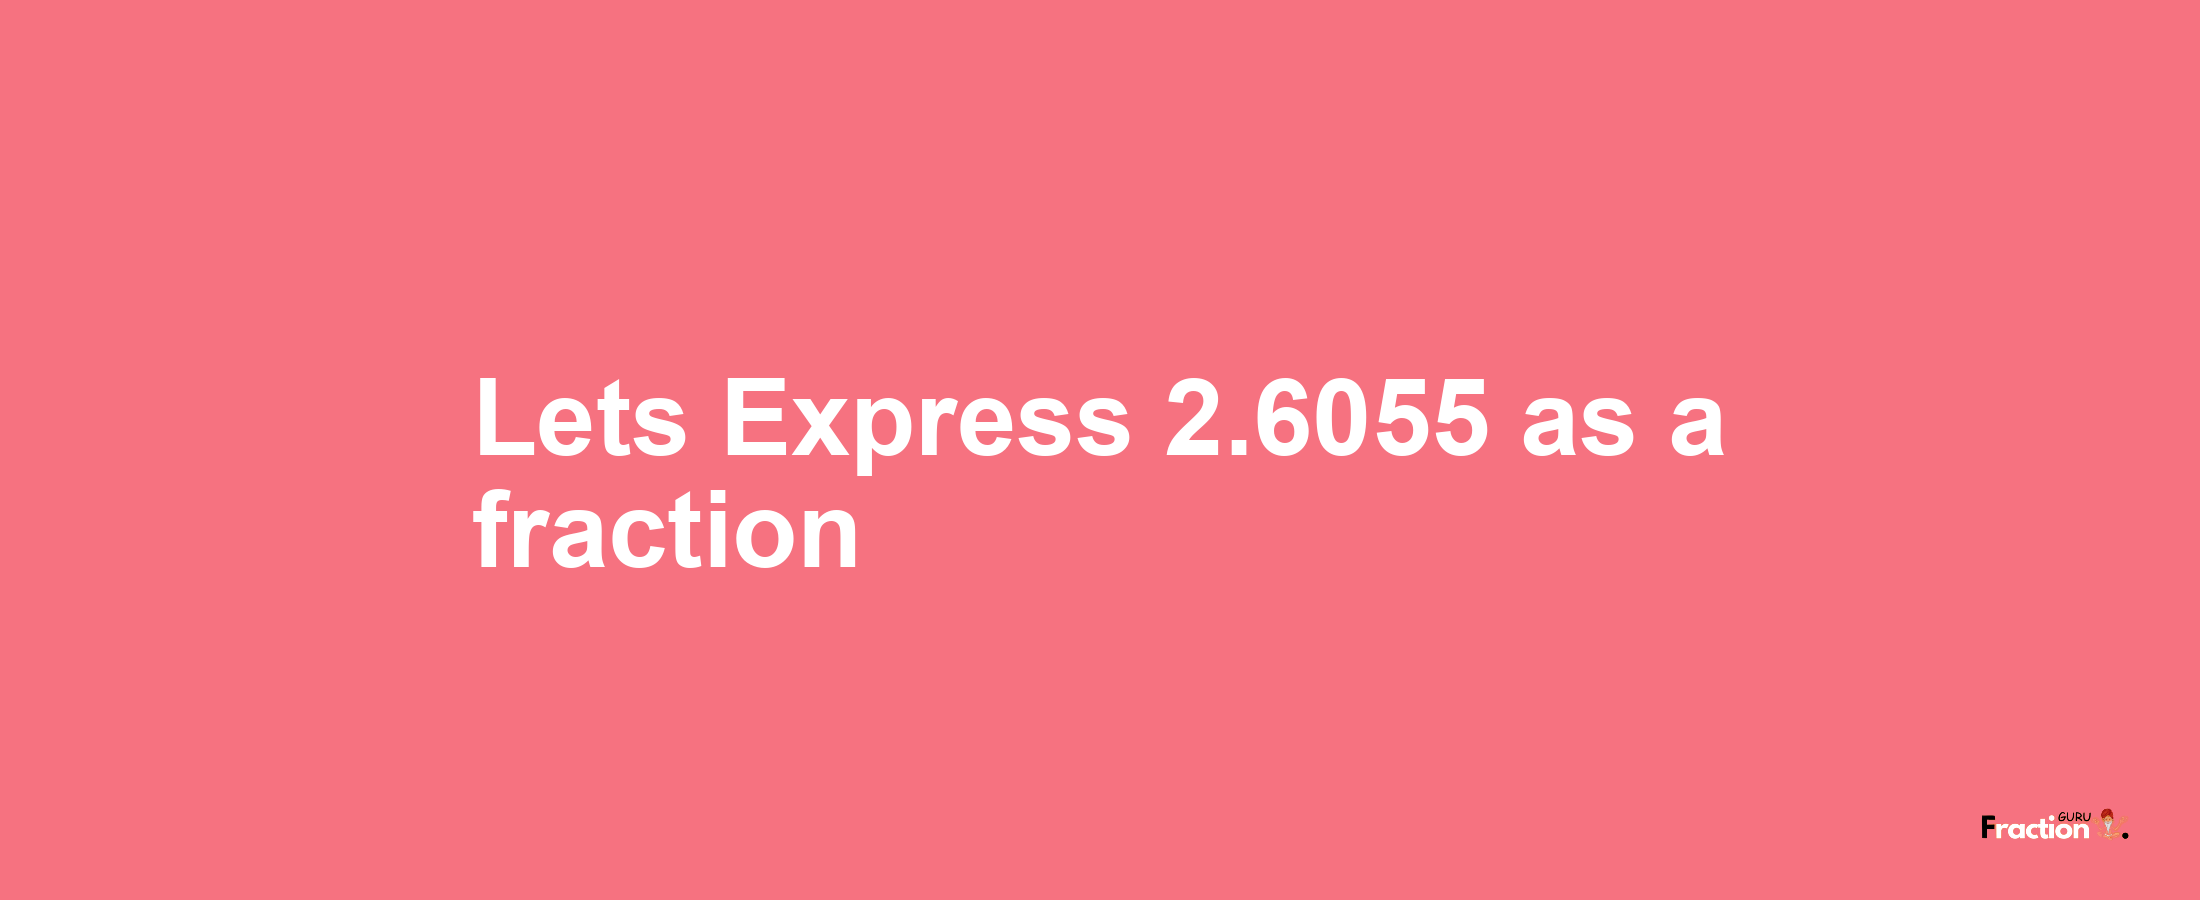 Lets Express 2.6055 as afraction